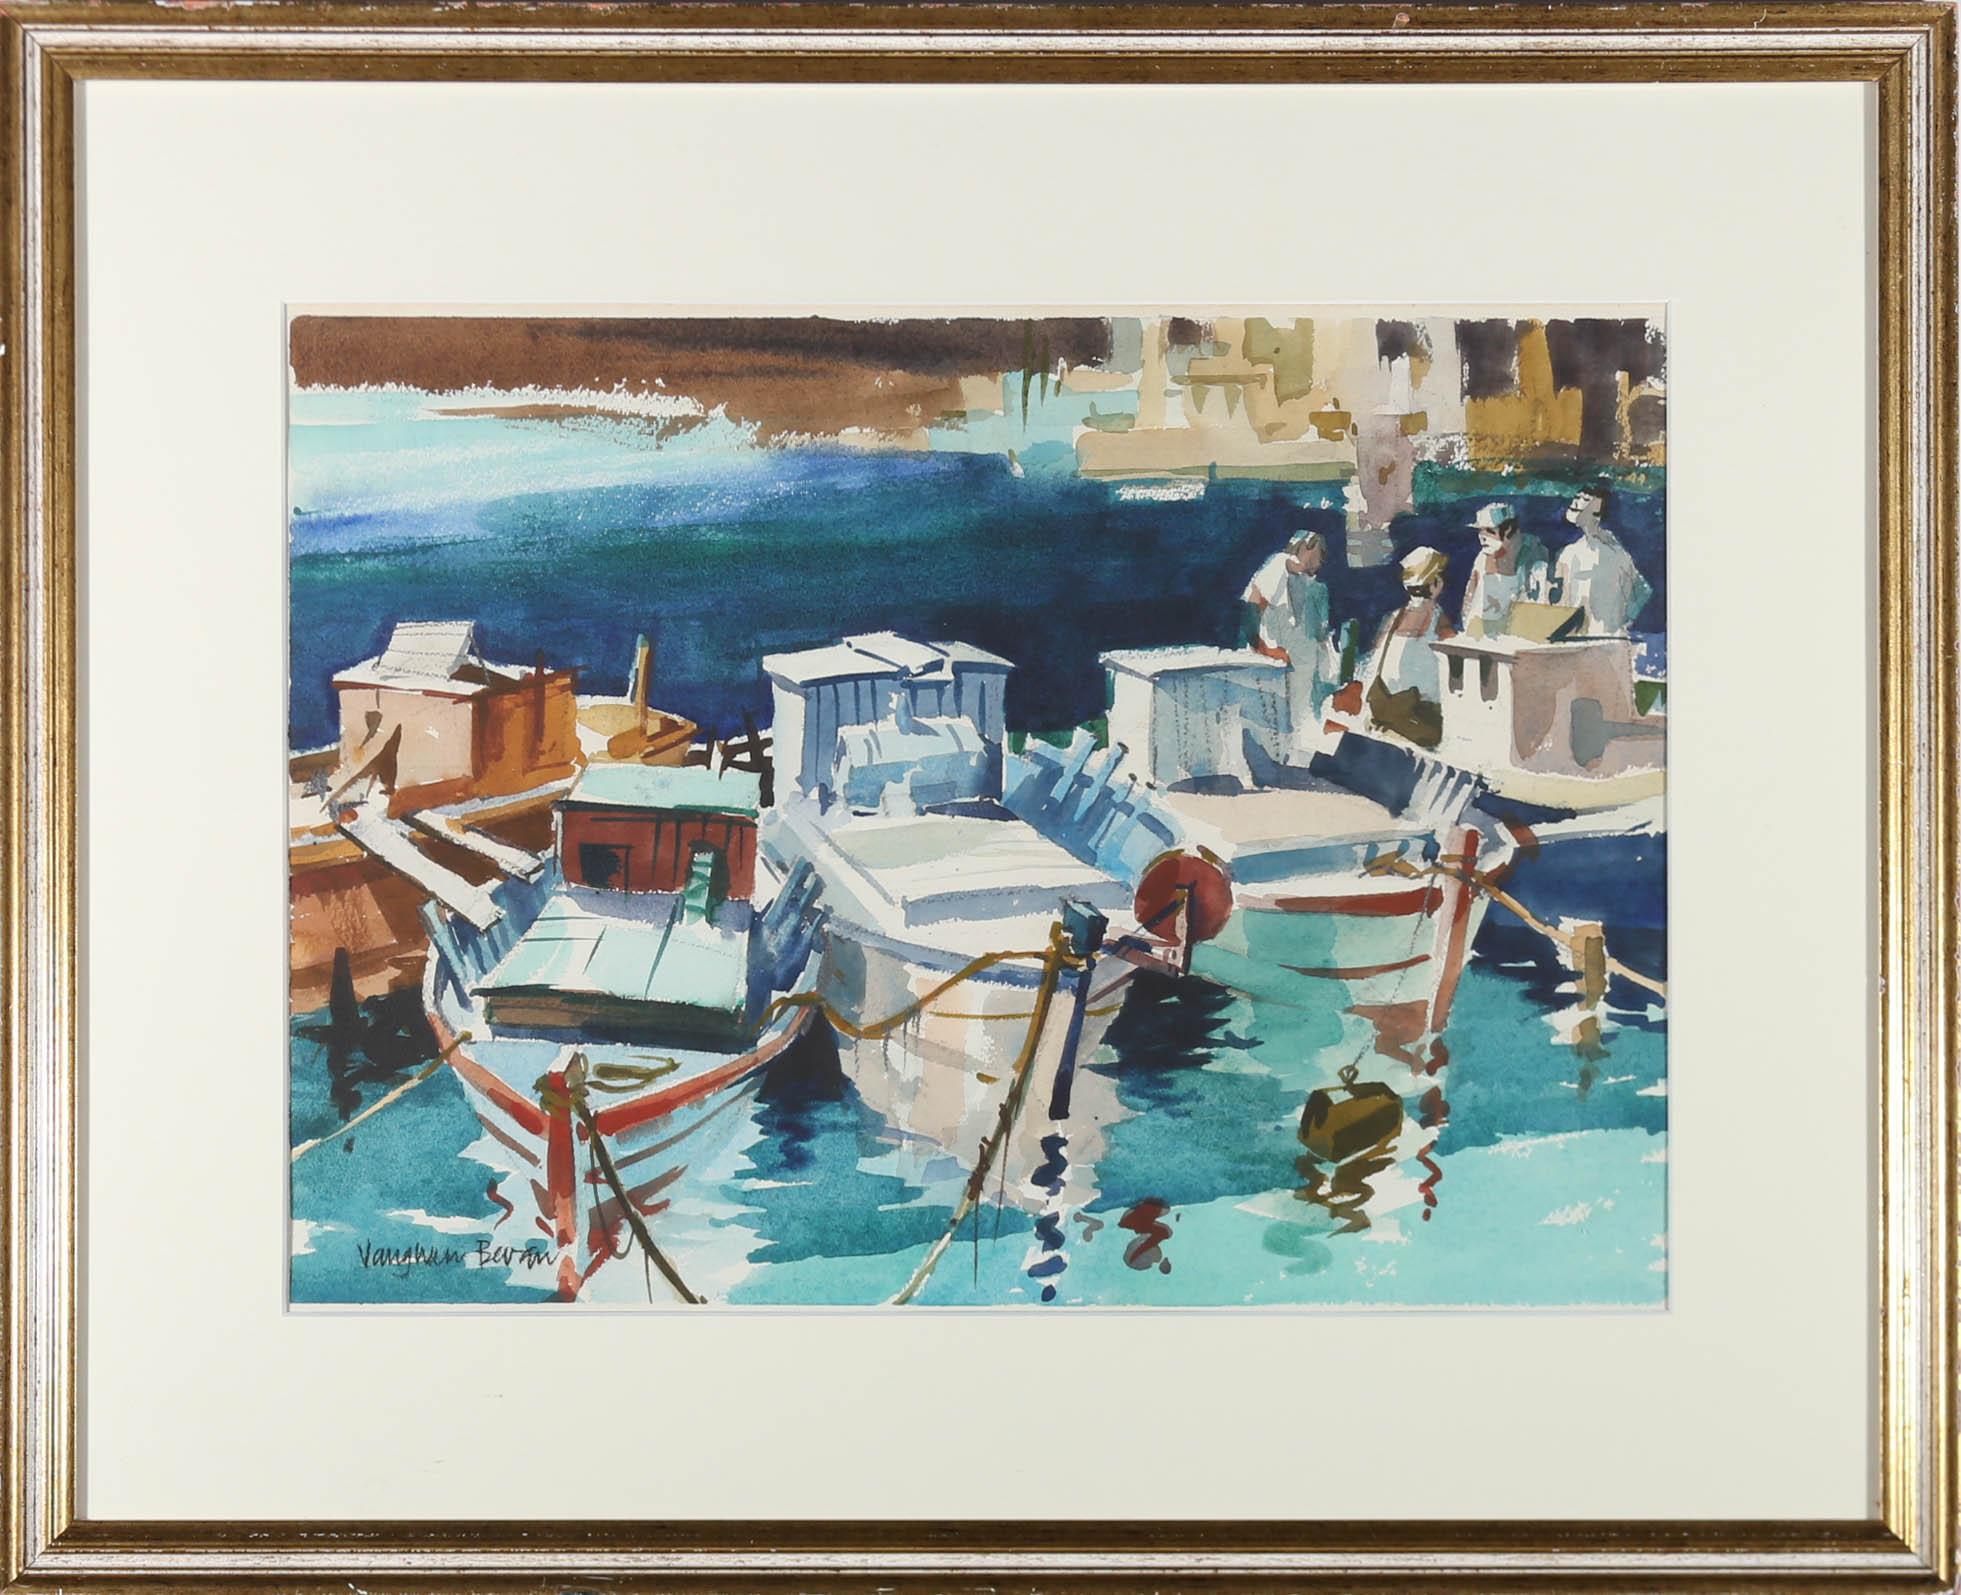 Reminiscent of holiday views, this fine watercolour depicts several fishing boats moored in a Greek harbour, surrounded by beautiful turquoise water. Signed to the lower left. Elegantly presented in a contemporary gilt frame with a crisp white